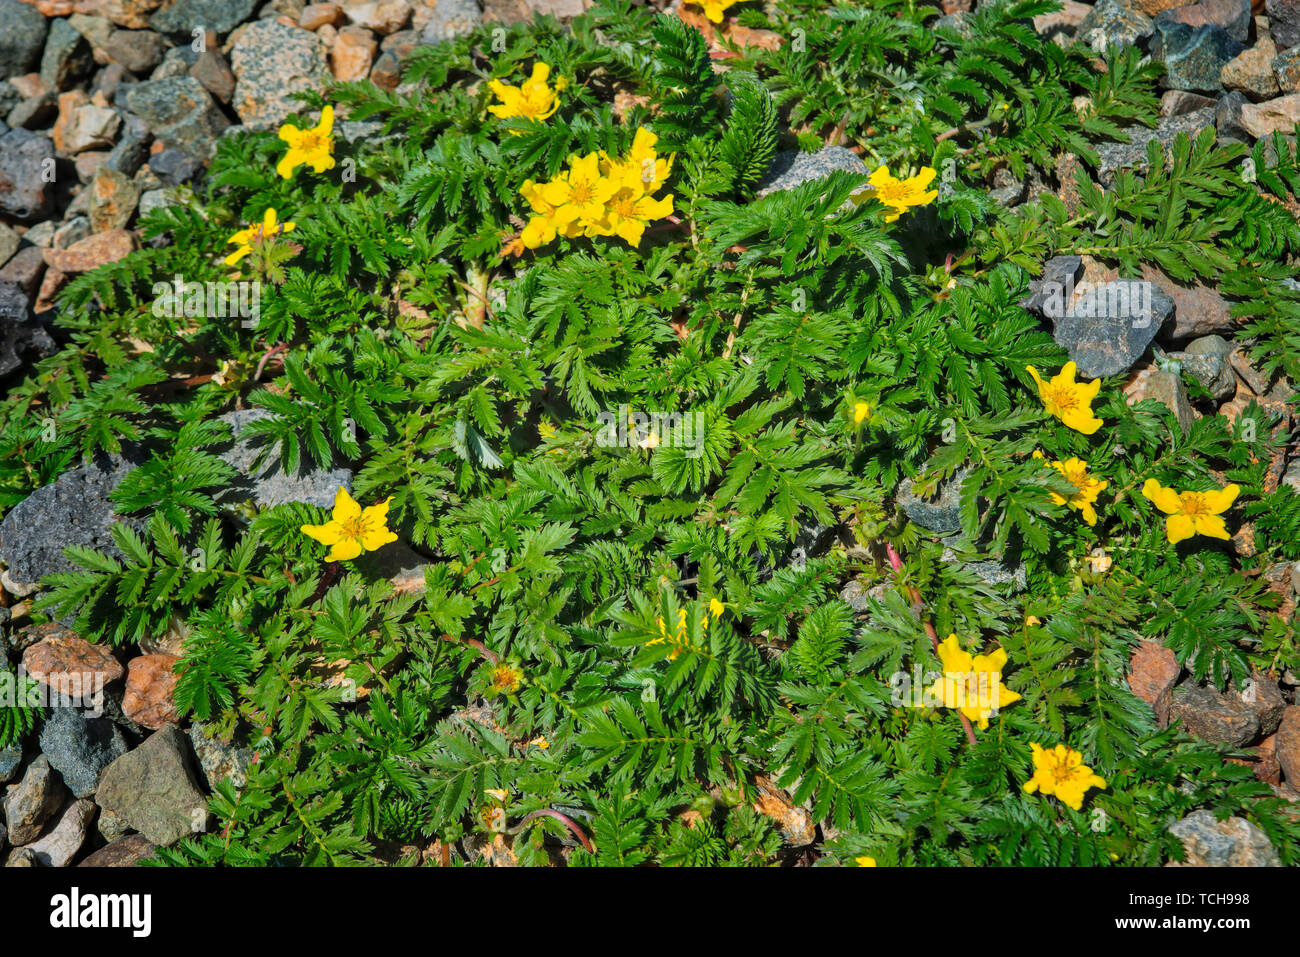 Argentina anserina or Potentilla anserina. It is known by the common names silverweed or silverweed cinquefoil. Natural green plant background, yellow Stock Photo